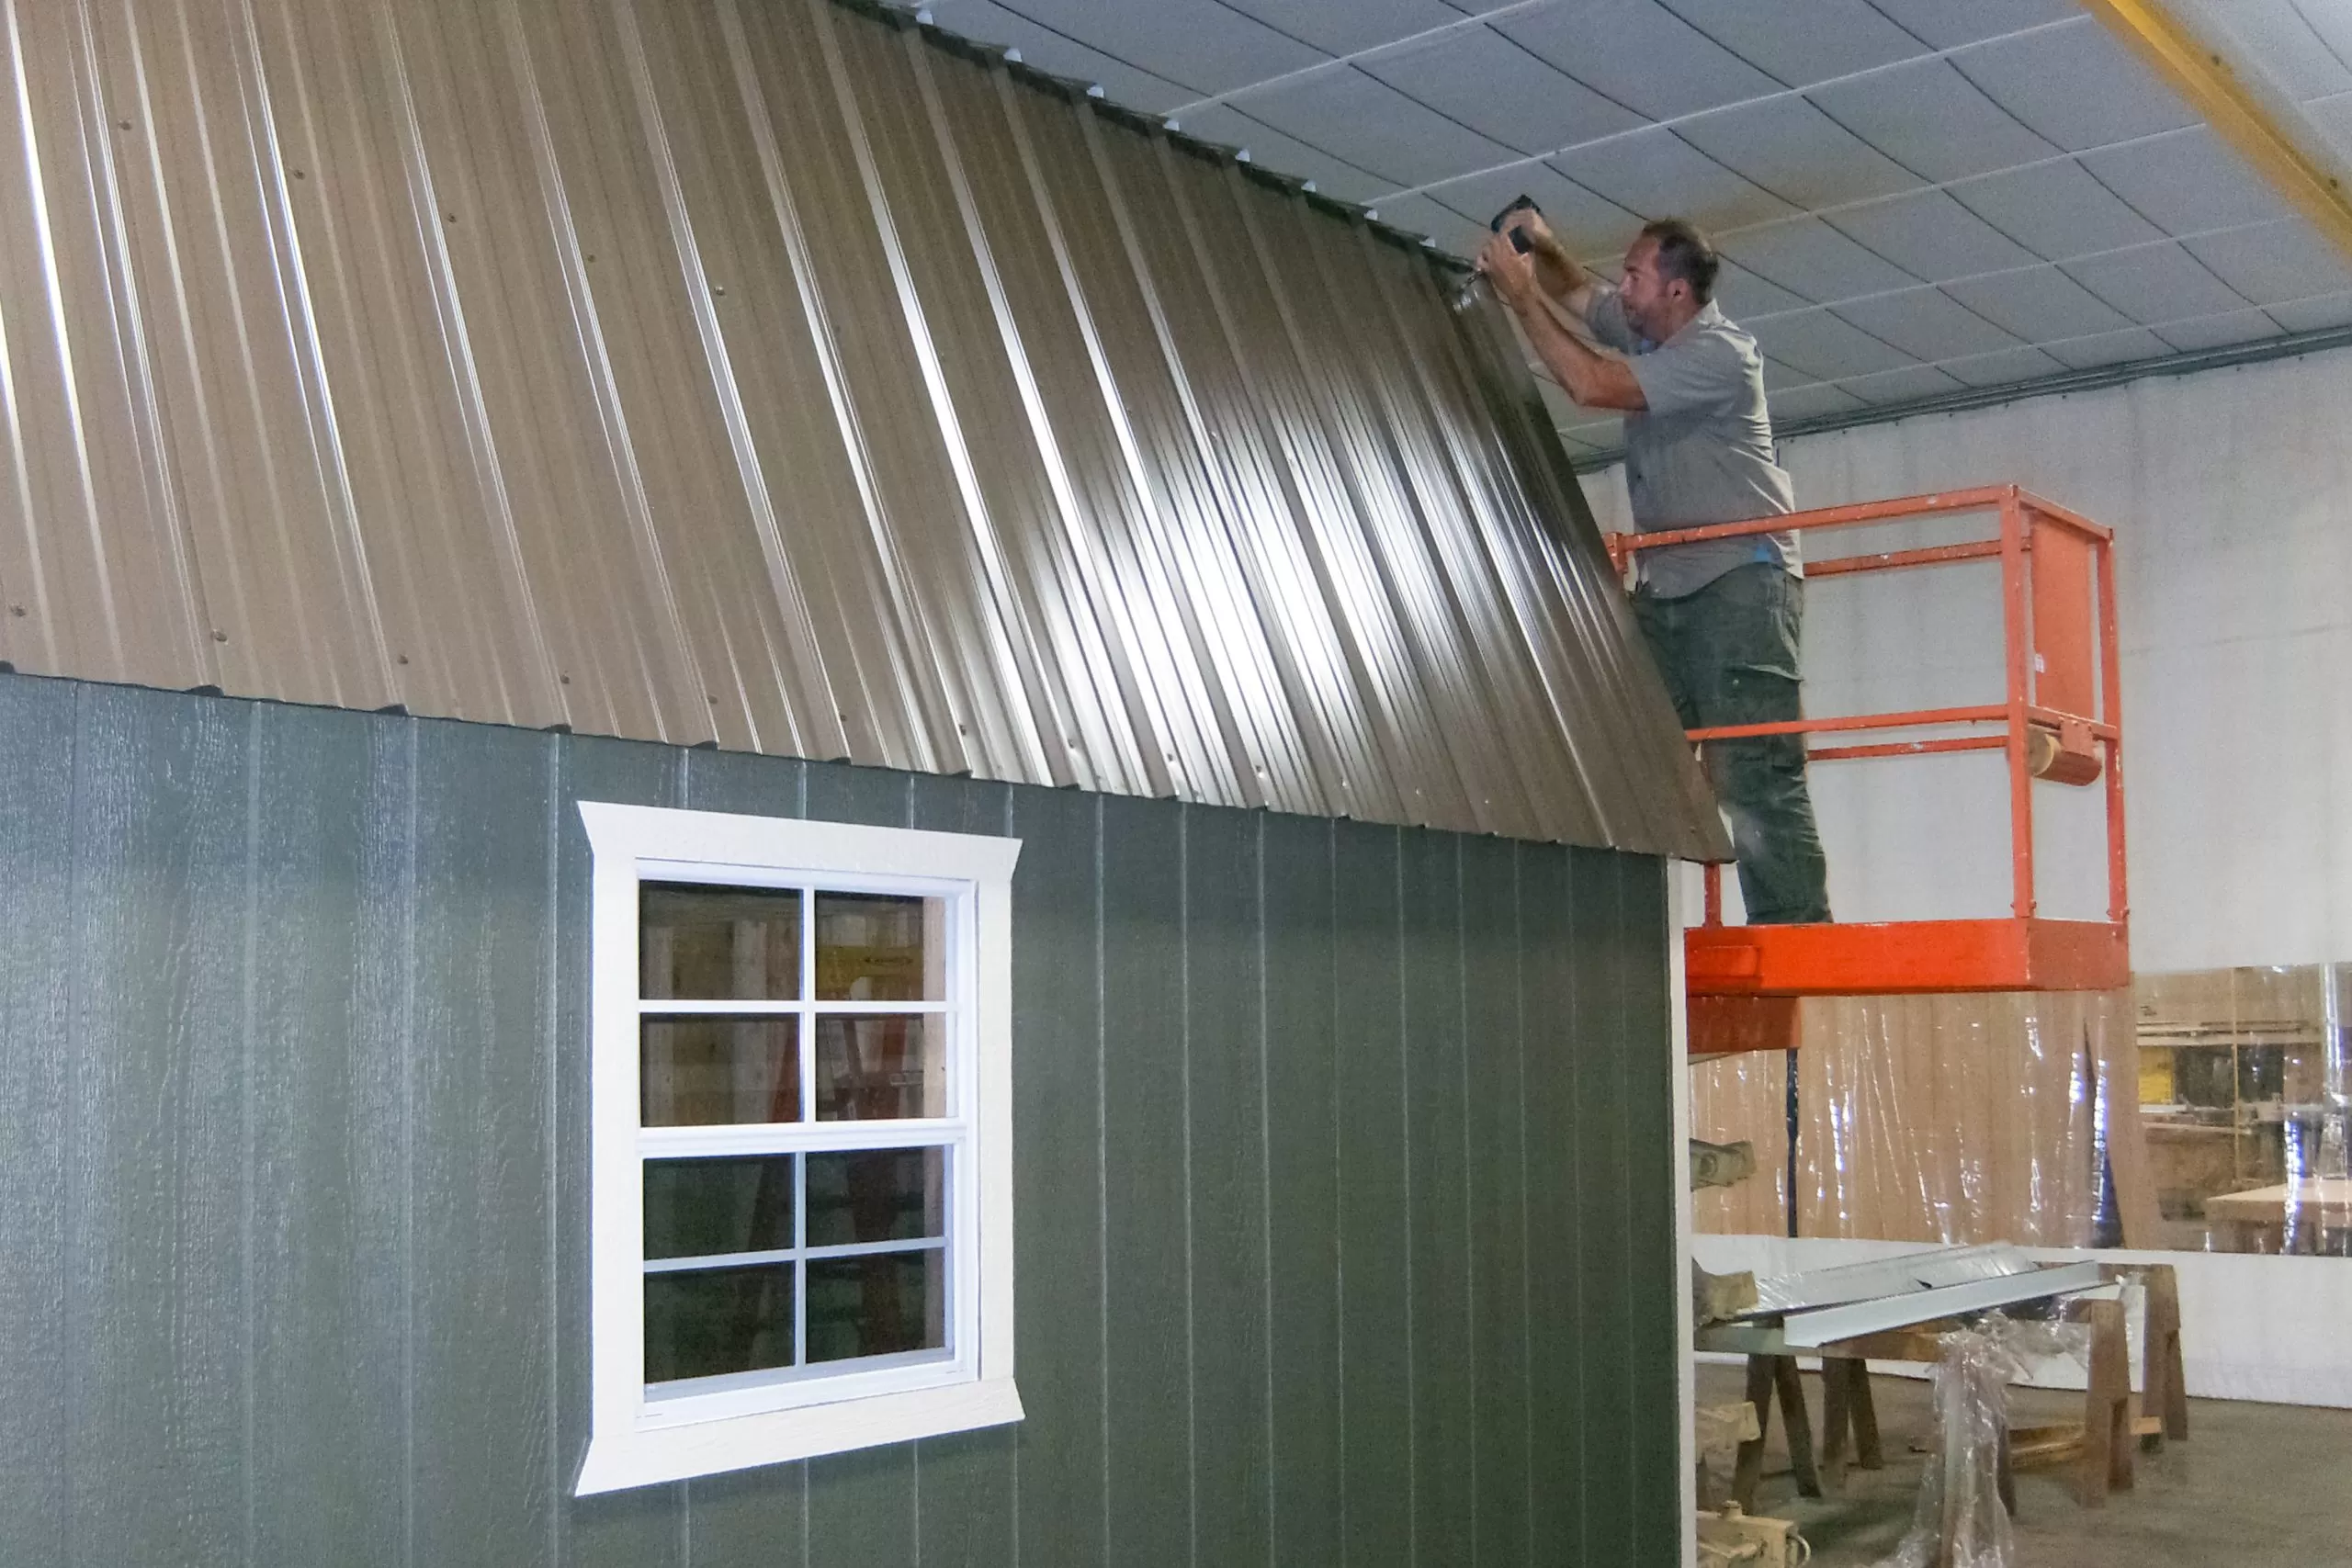 metal roofing on a tough shed